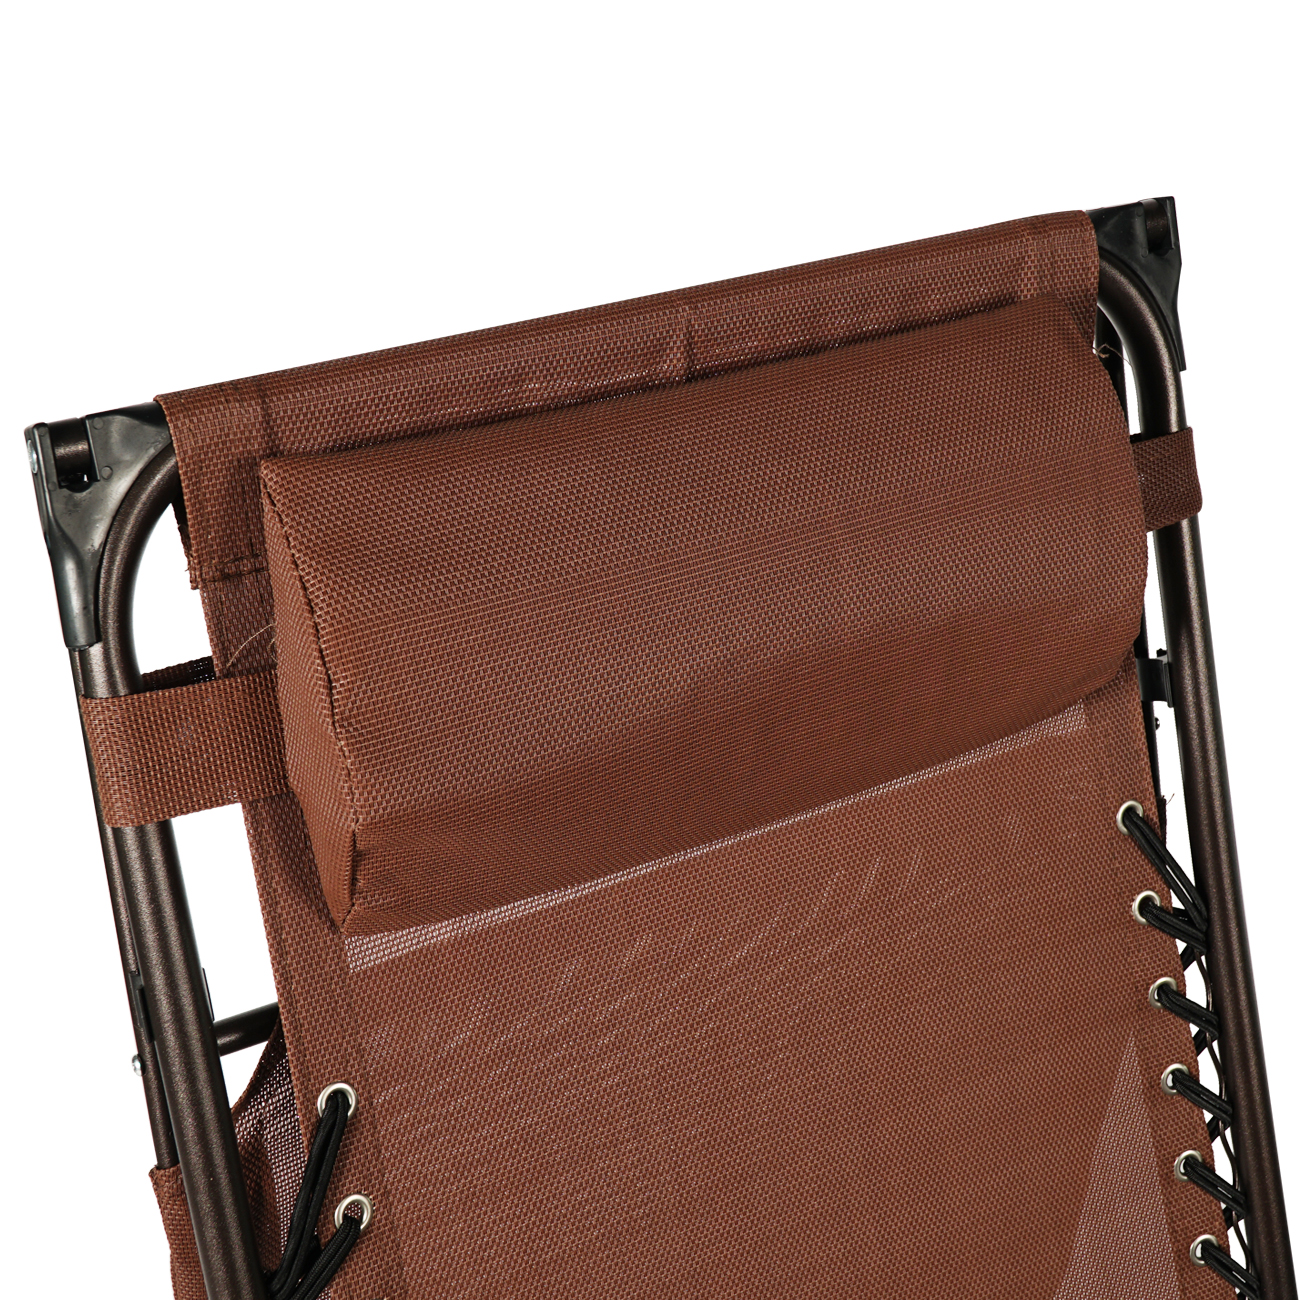 BELLEZE Zero Gravity Chair Shade Blocker Folding Chair Folding Chair Bungee Suspension Canopy Patio Brown - image 3 of 7